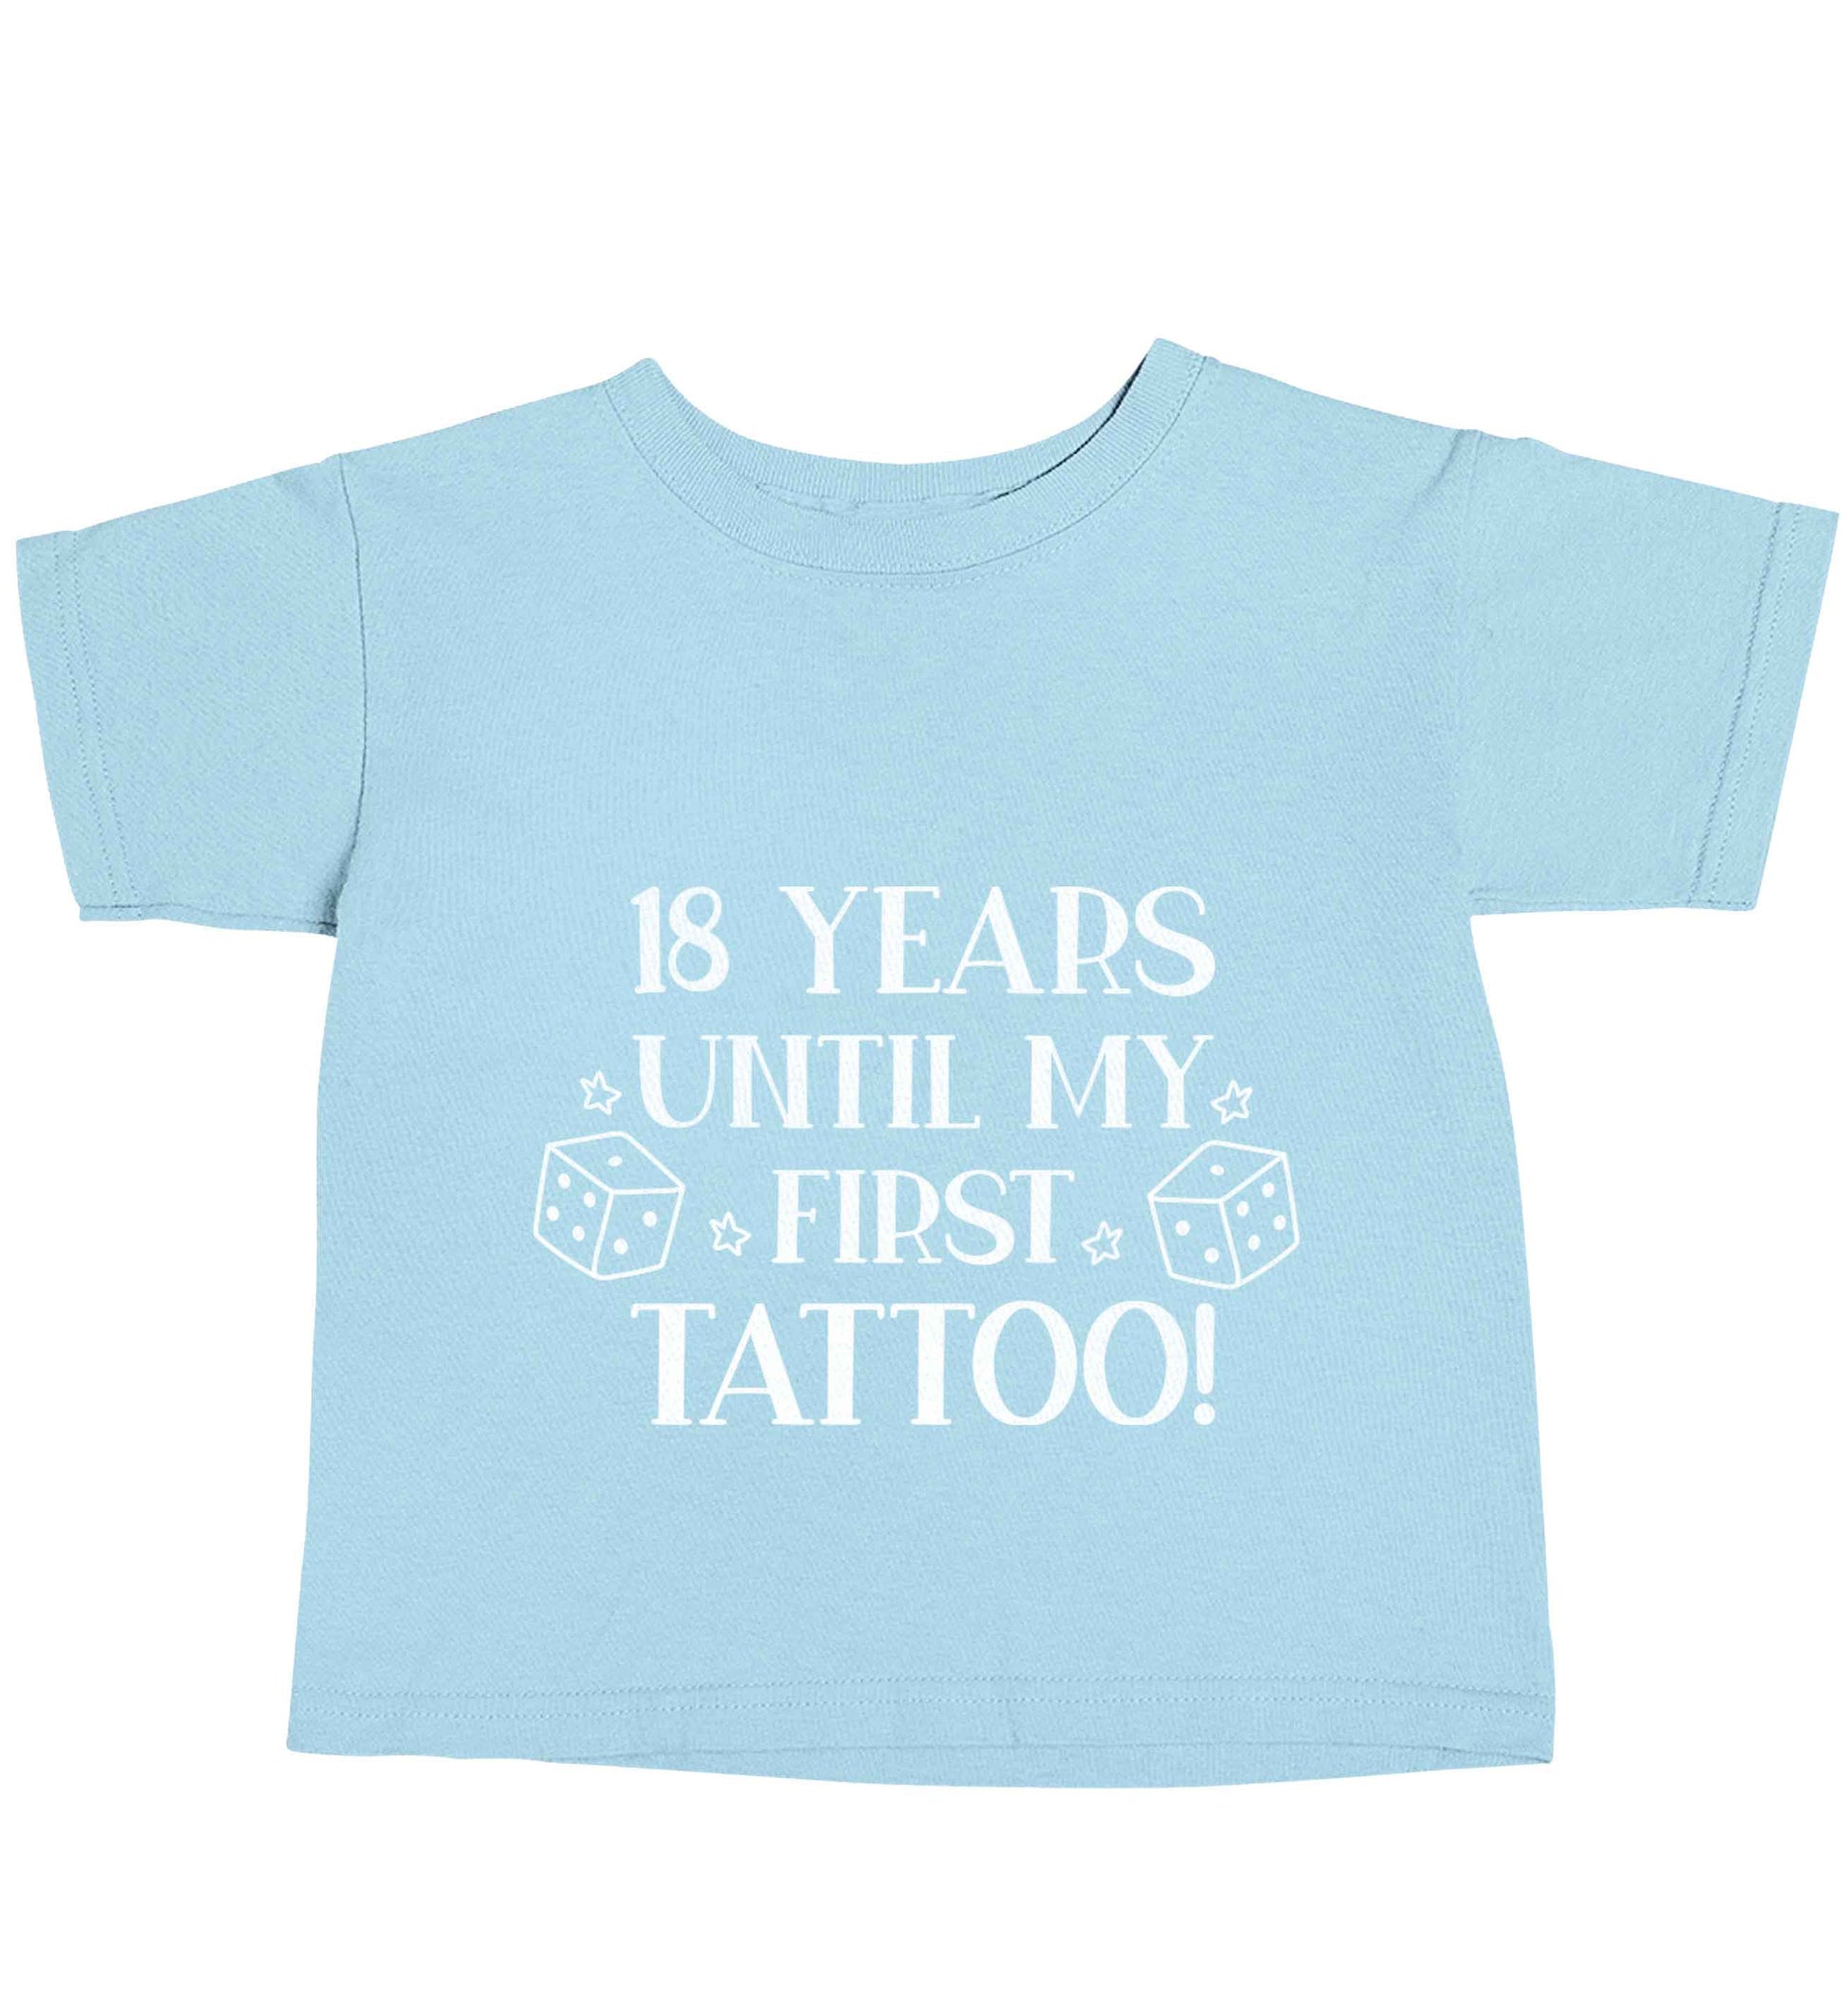 18 Years Until my First Tattoo light blue baby toddler Tshirt 2 Years